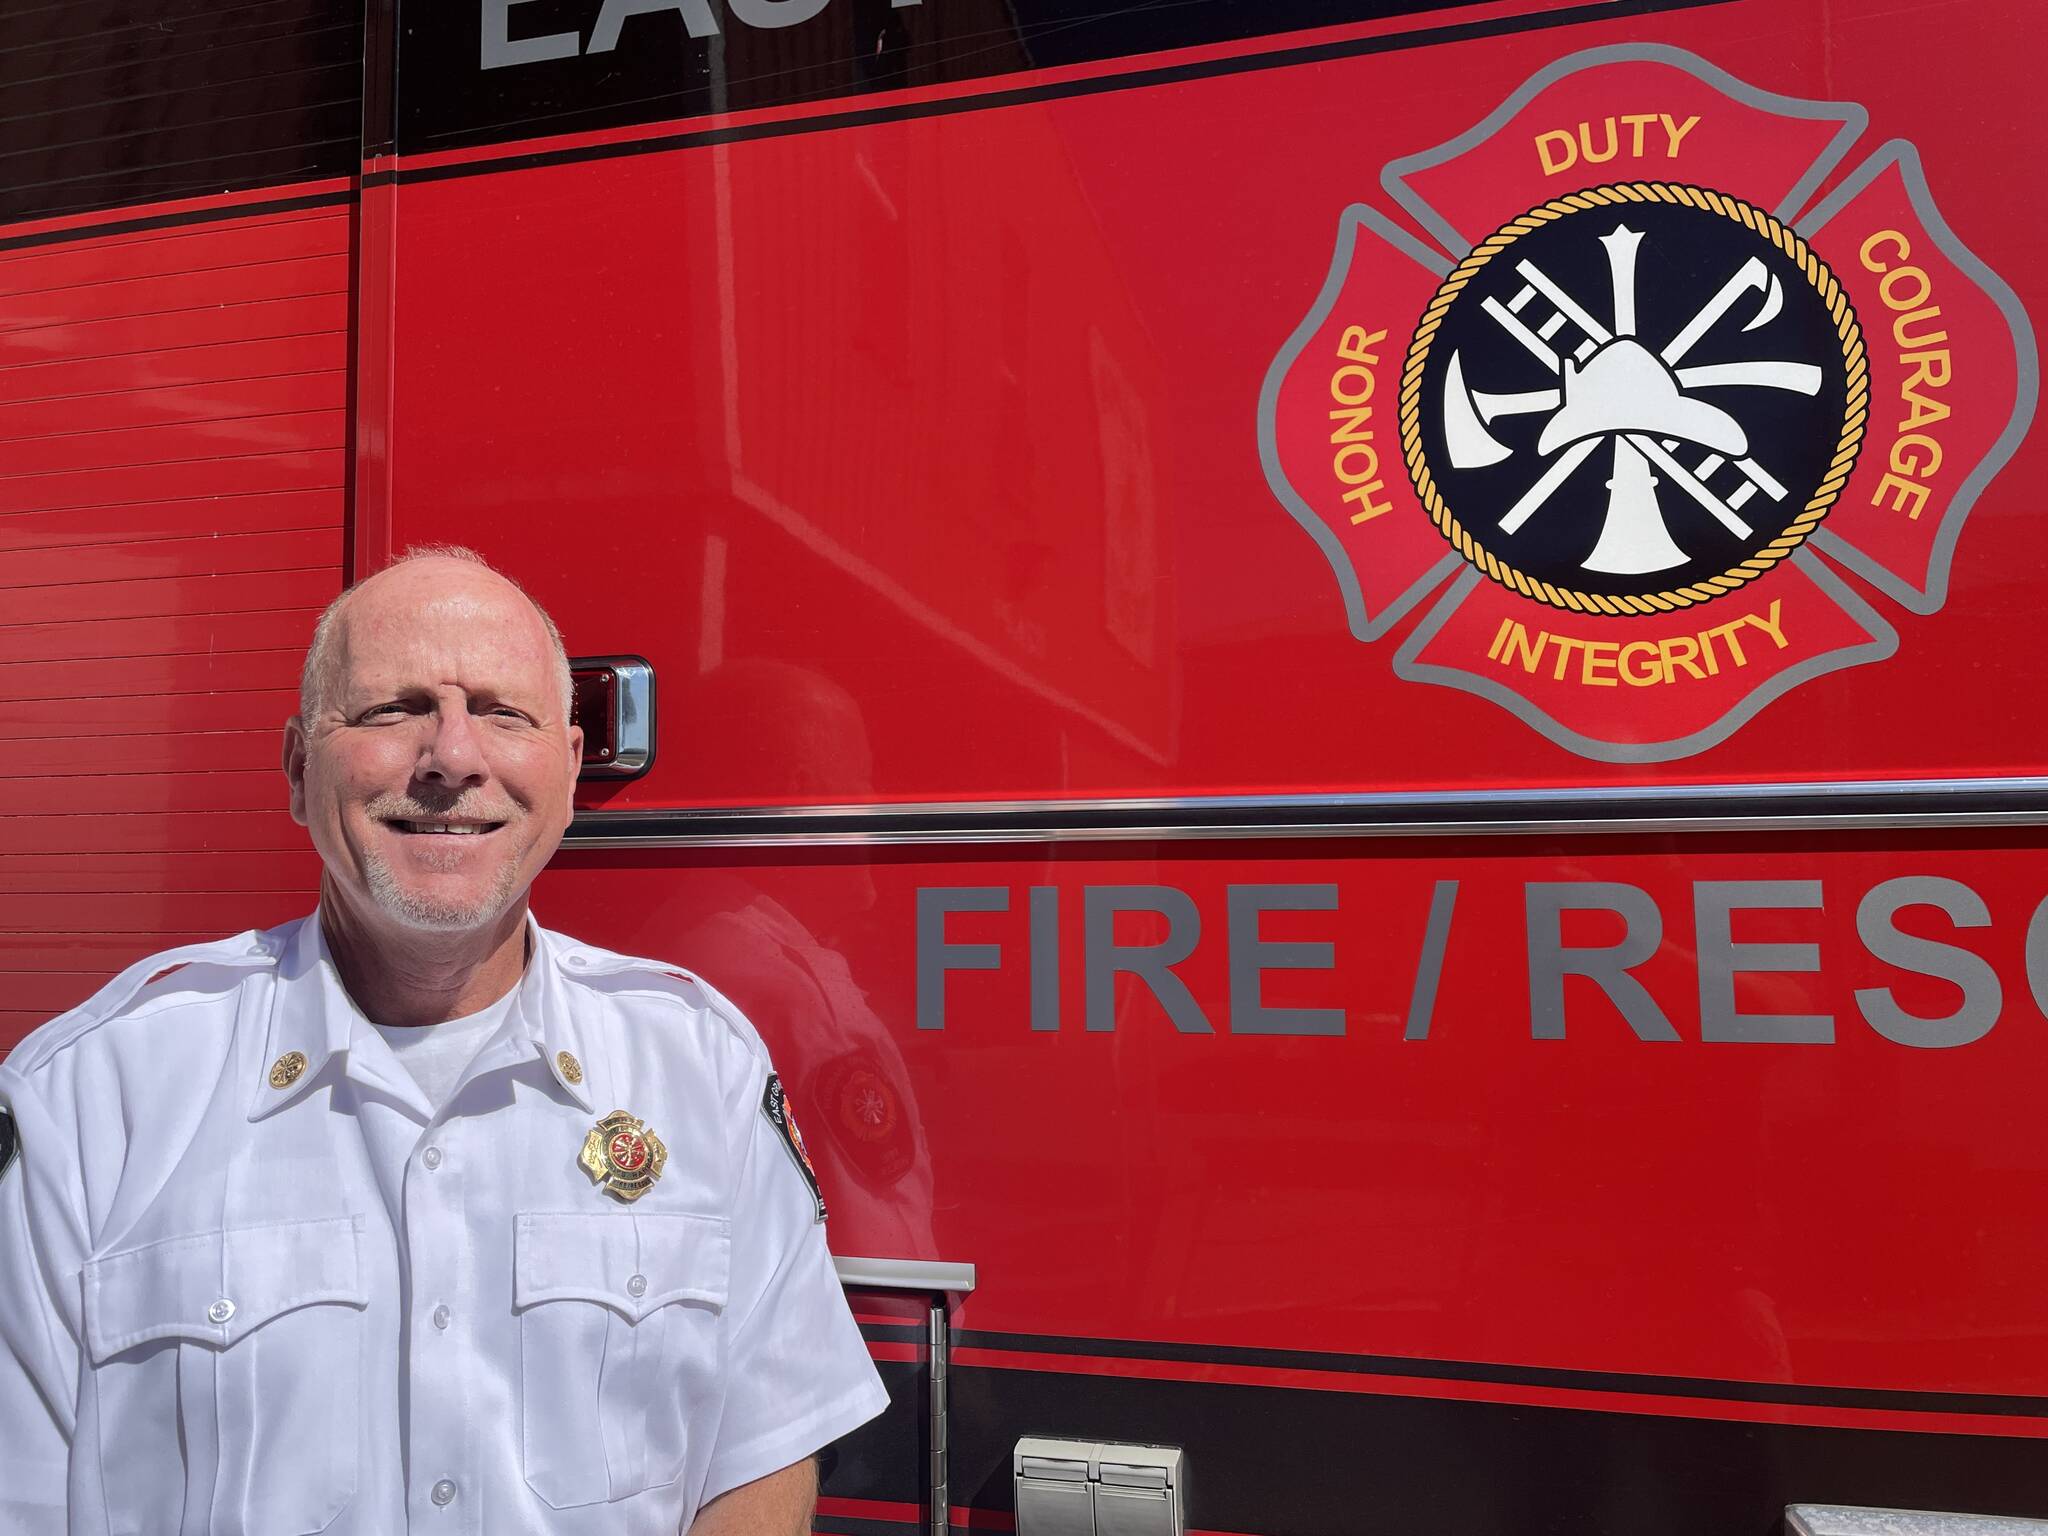 New East Grays Harbor Fire and Rescue Chief Kenny Ward joined the department on July 10, coming from the Midwest. (Michael S. Lockett / The Daily World)